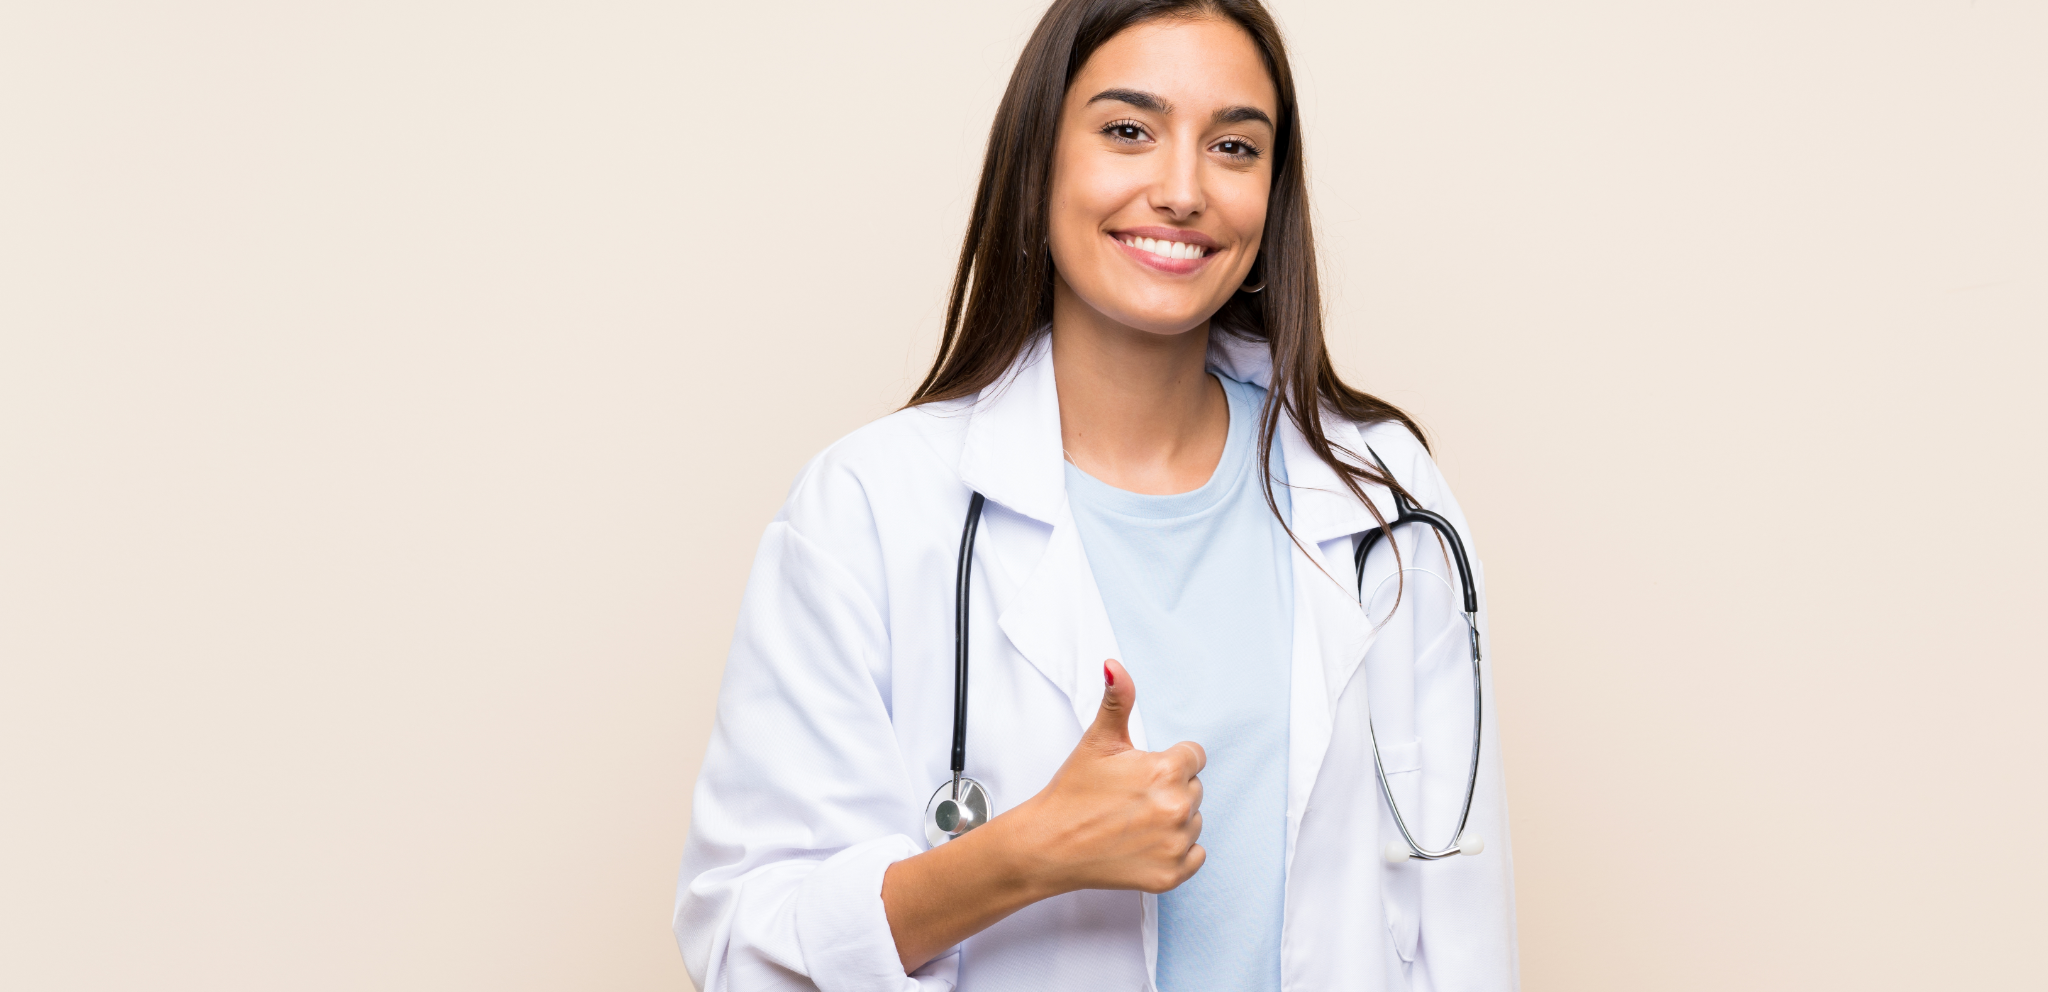 Female doctor giving thumbs up